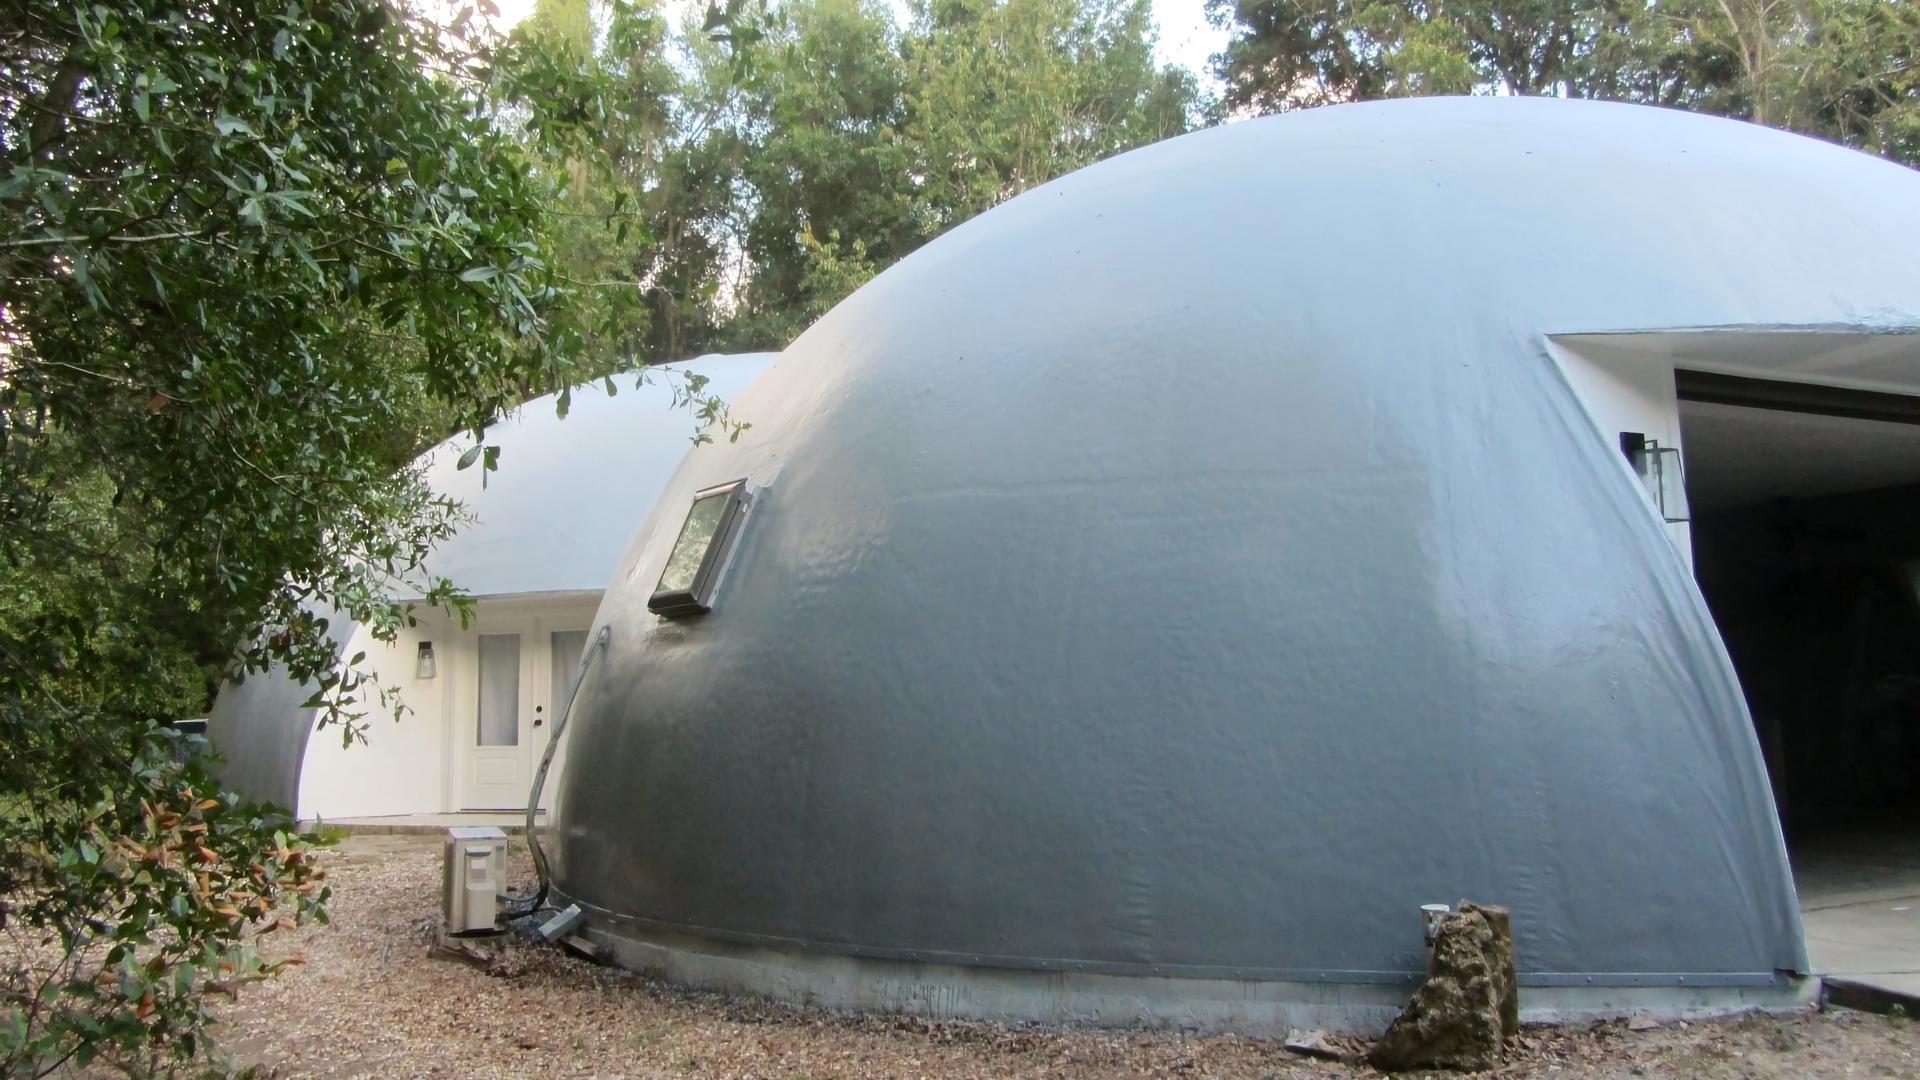 The final look of the dome house.